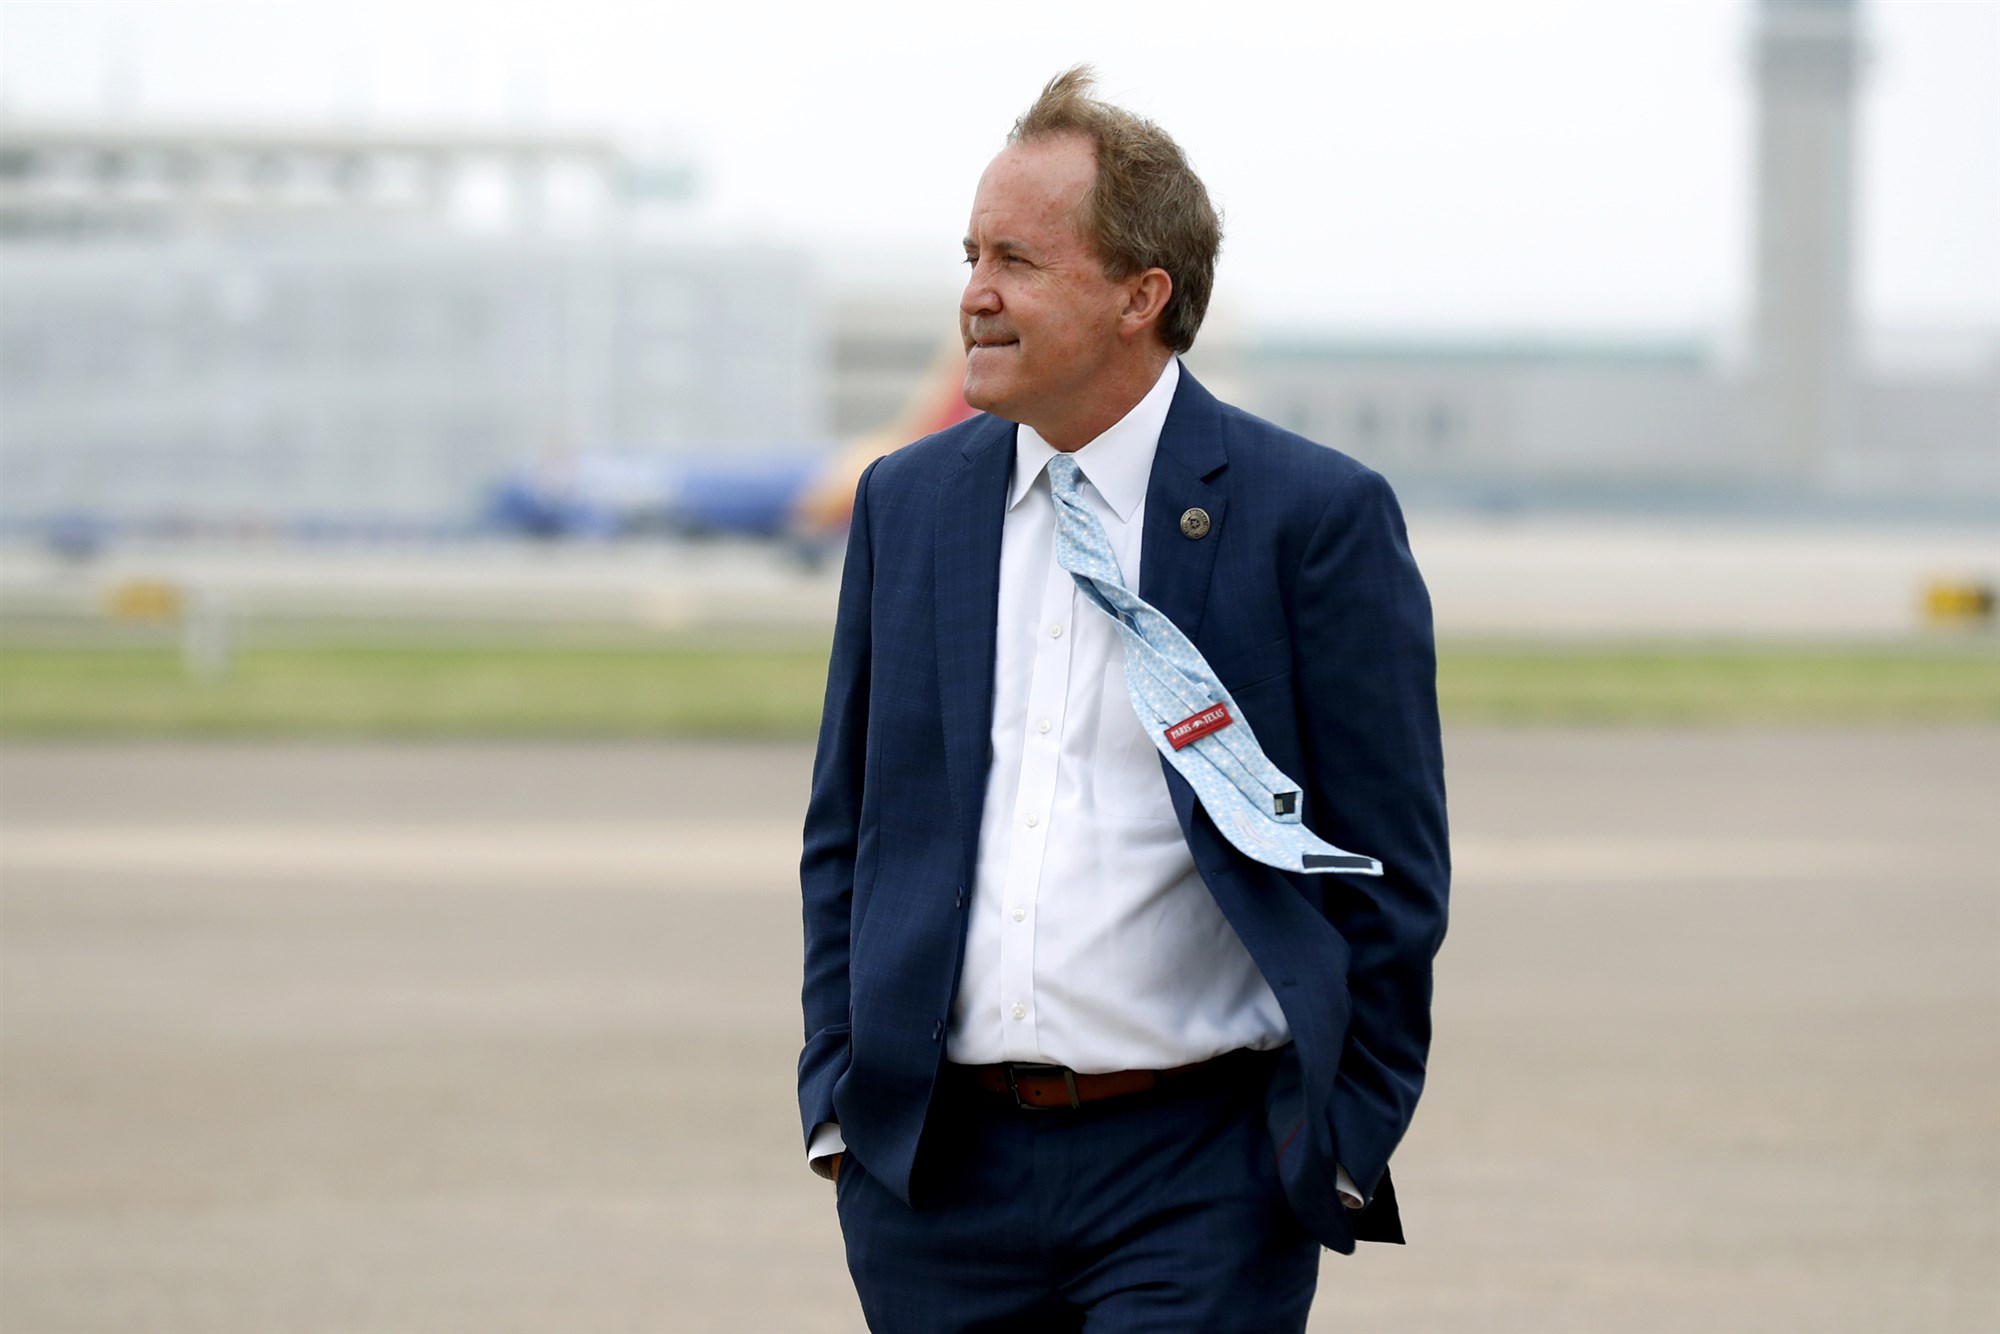 Twitter Suing Texas AG Ken Paxton for Retaliation